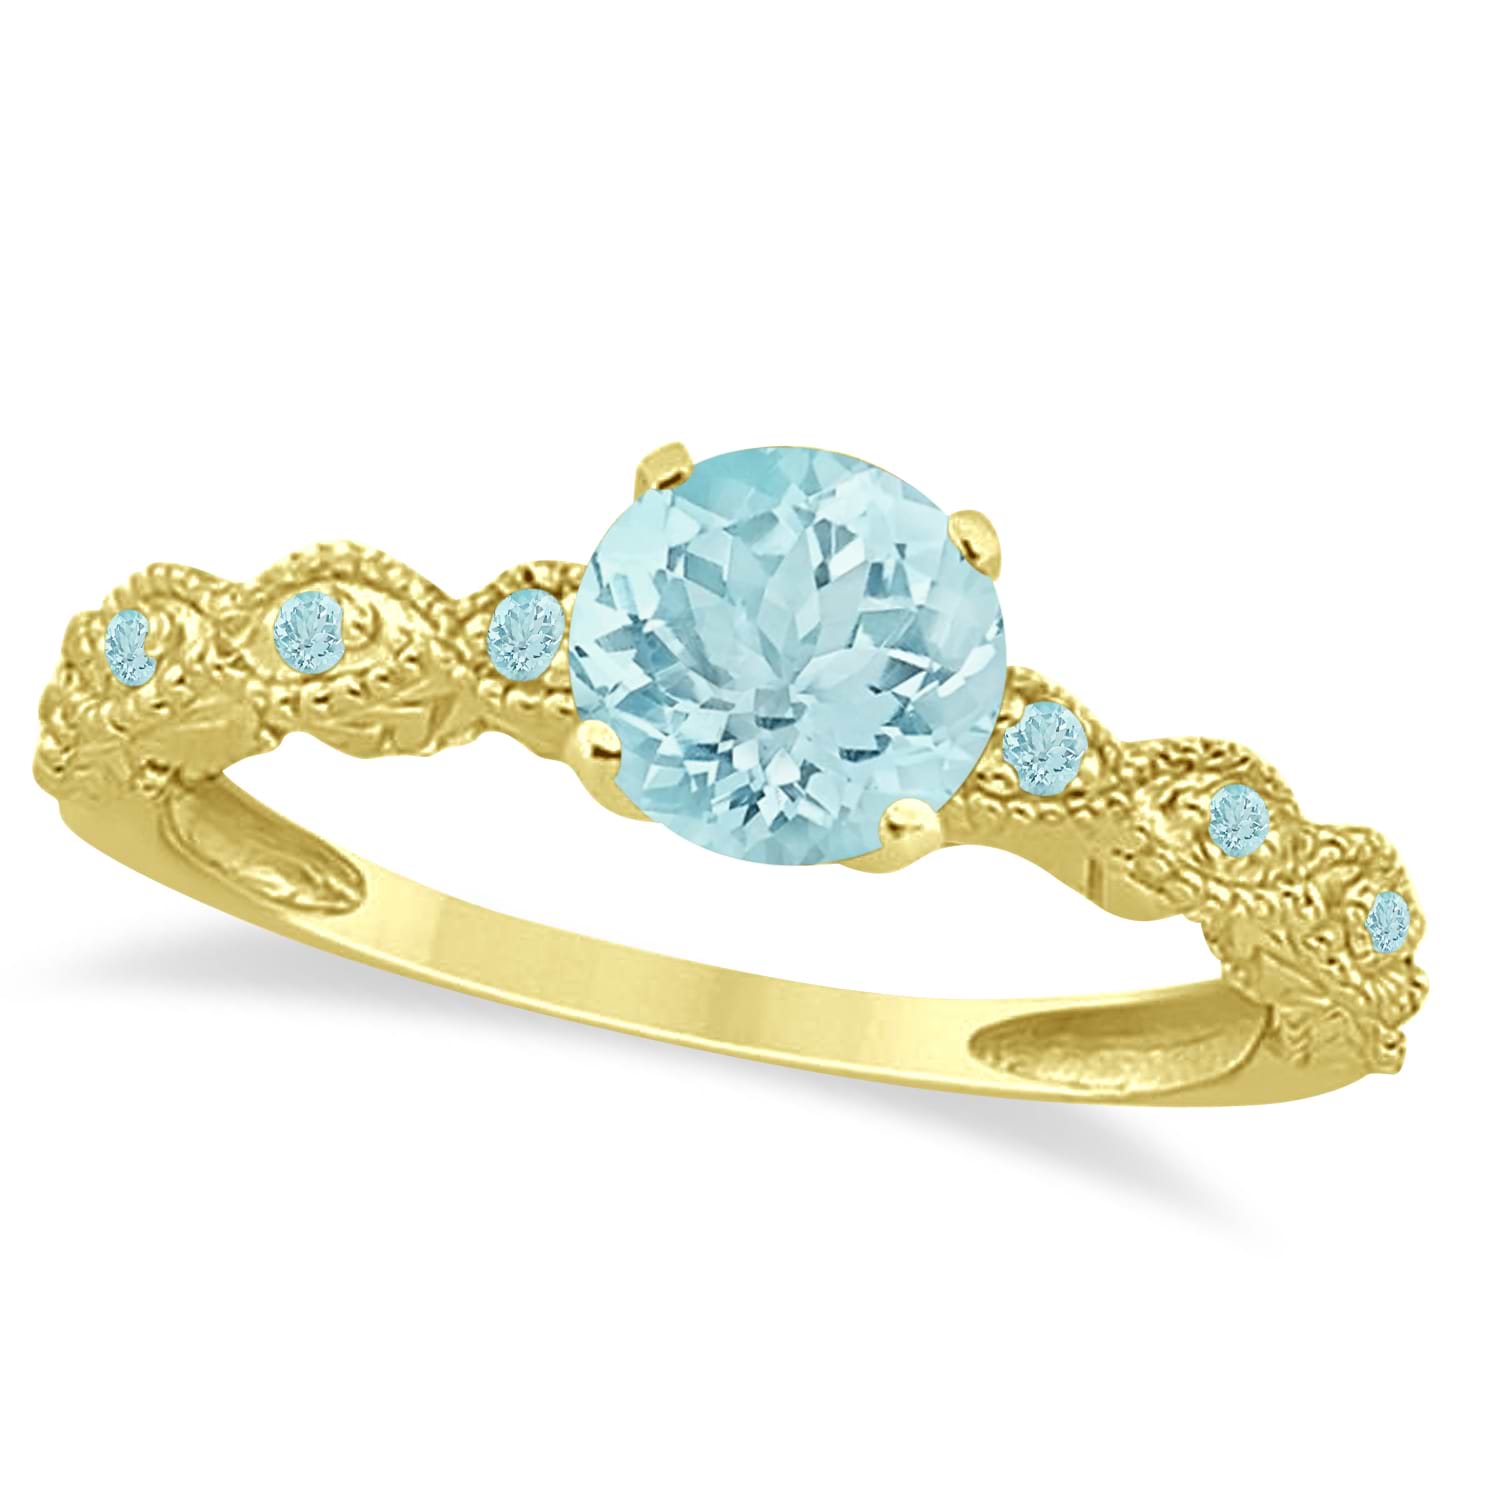 Vintage Style Aquamarine Engagement Ring in 14k Yellow Gold (1.18ct)